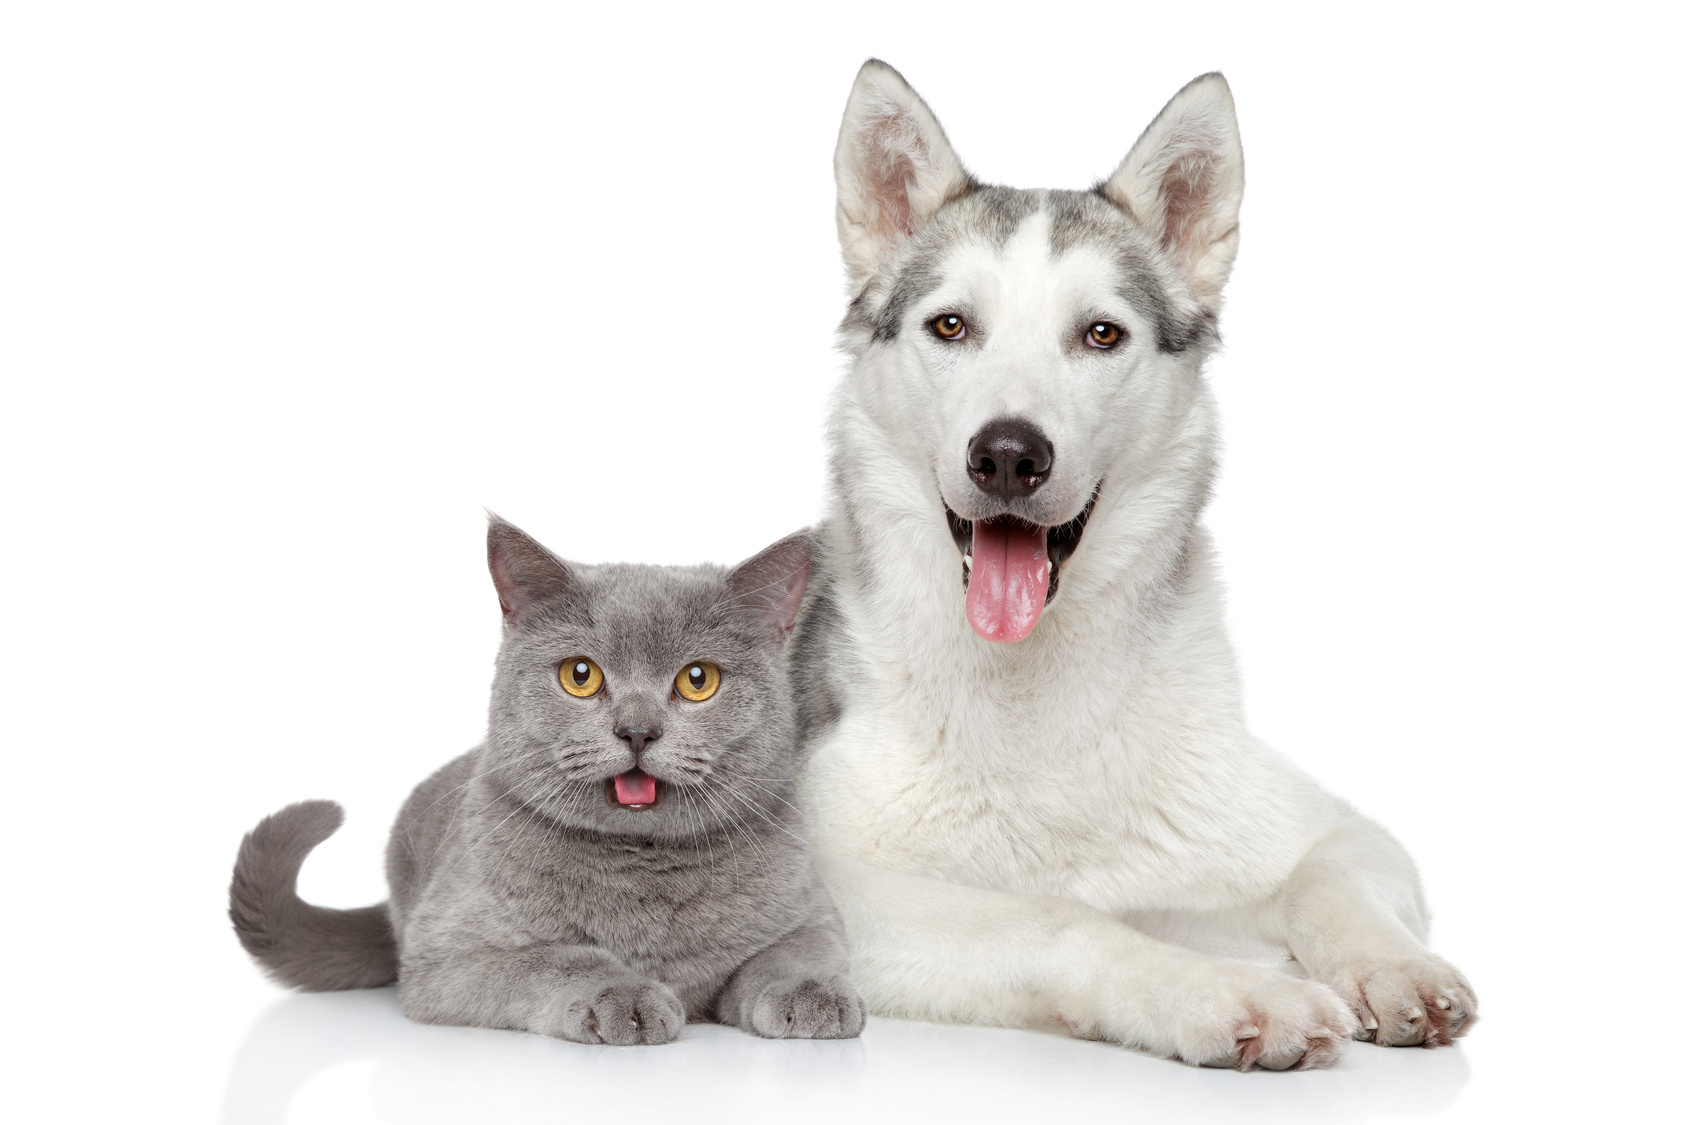 cat-and-dog-together-on-a-white-background-2